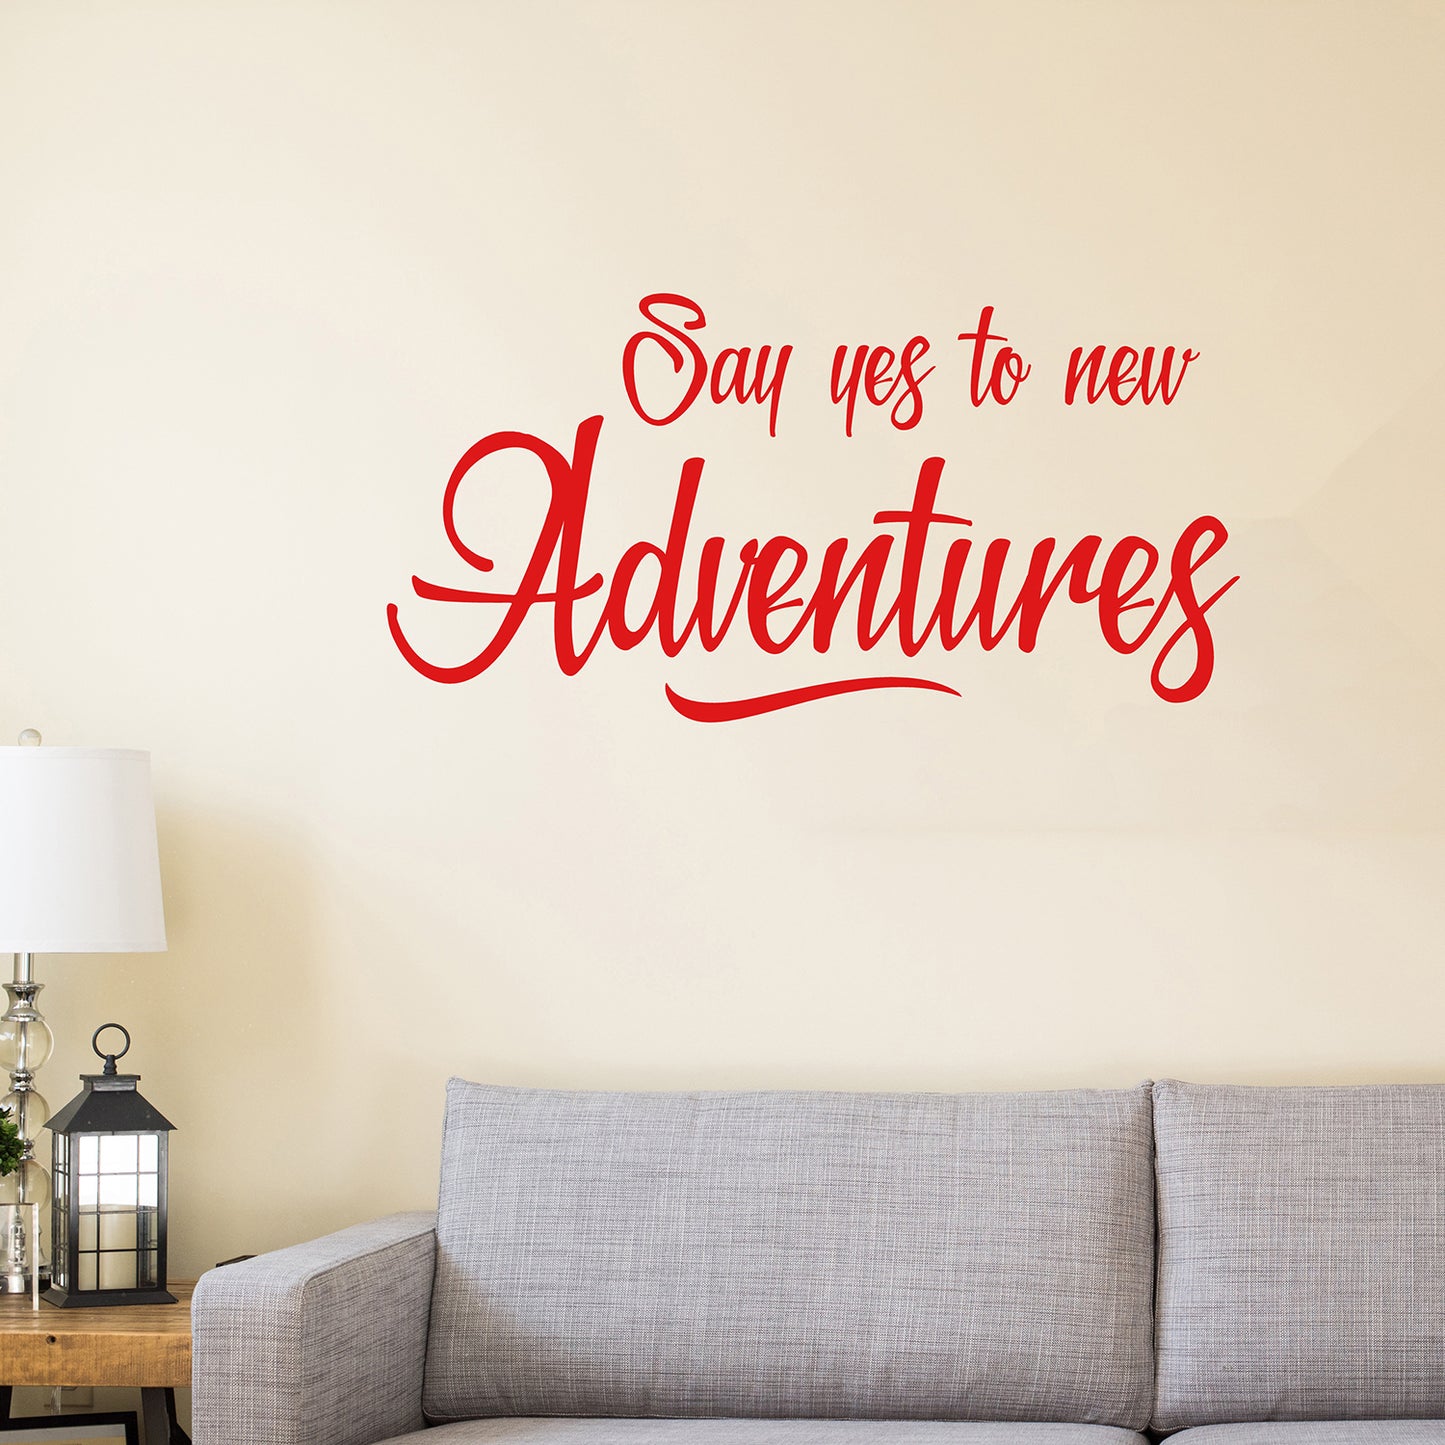 Say yes to new adventures | Wall quote